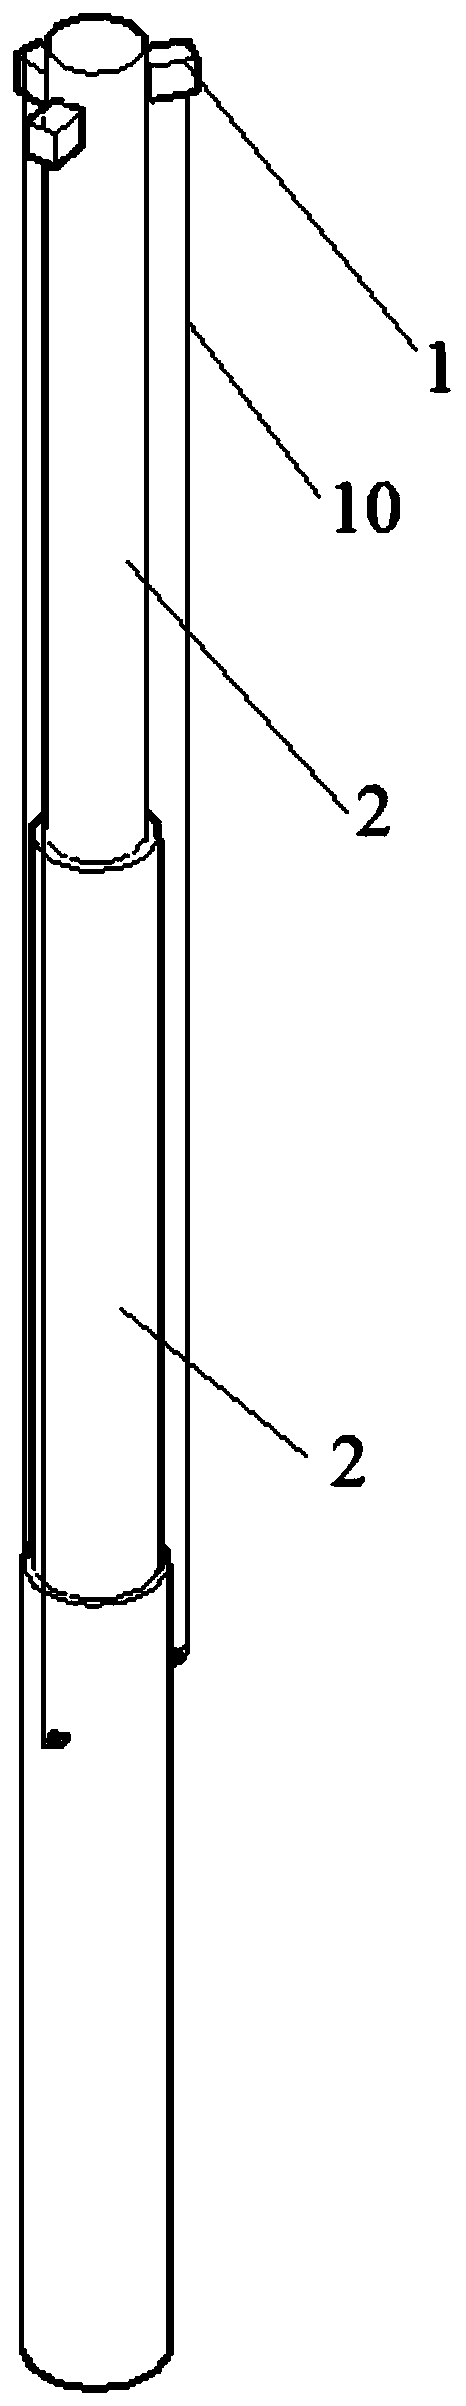 A concrete telescopic conduit based on wireless remote control dry operation